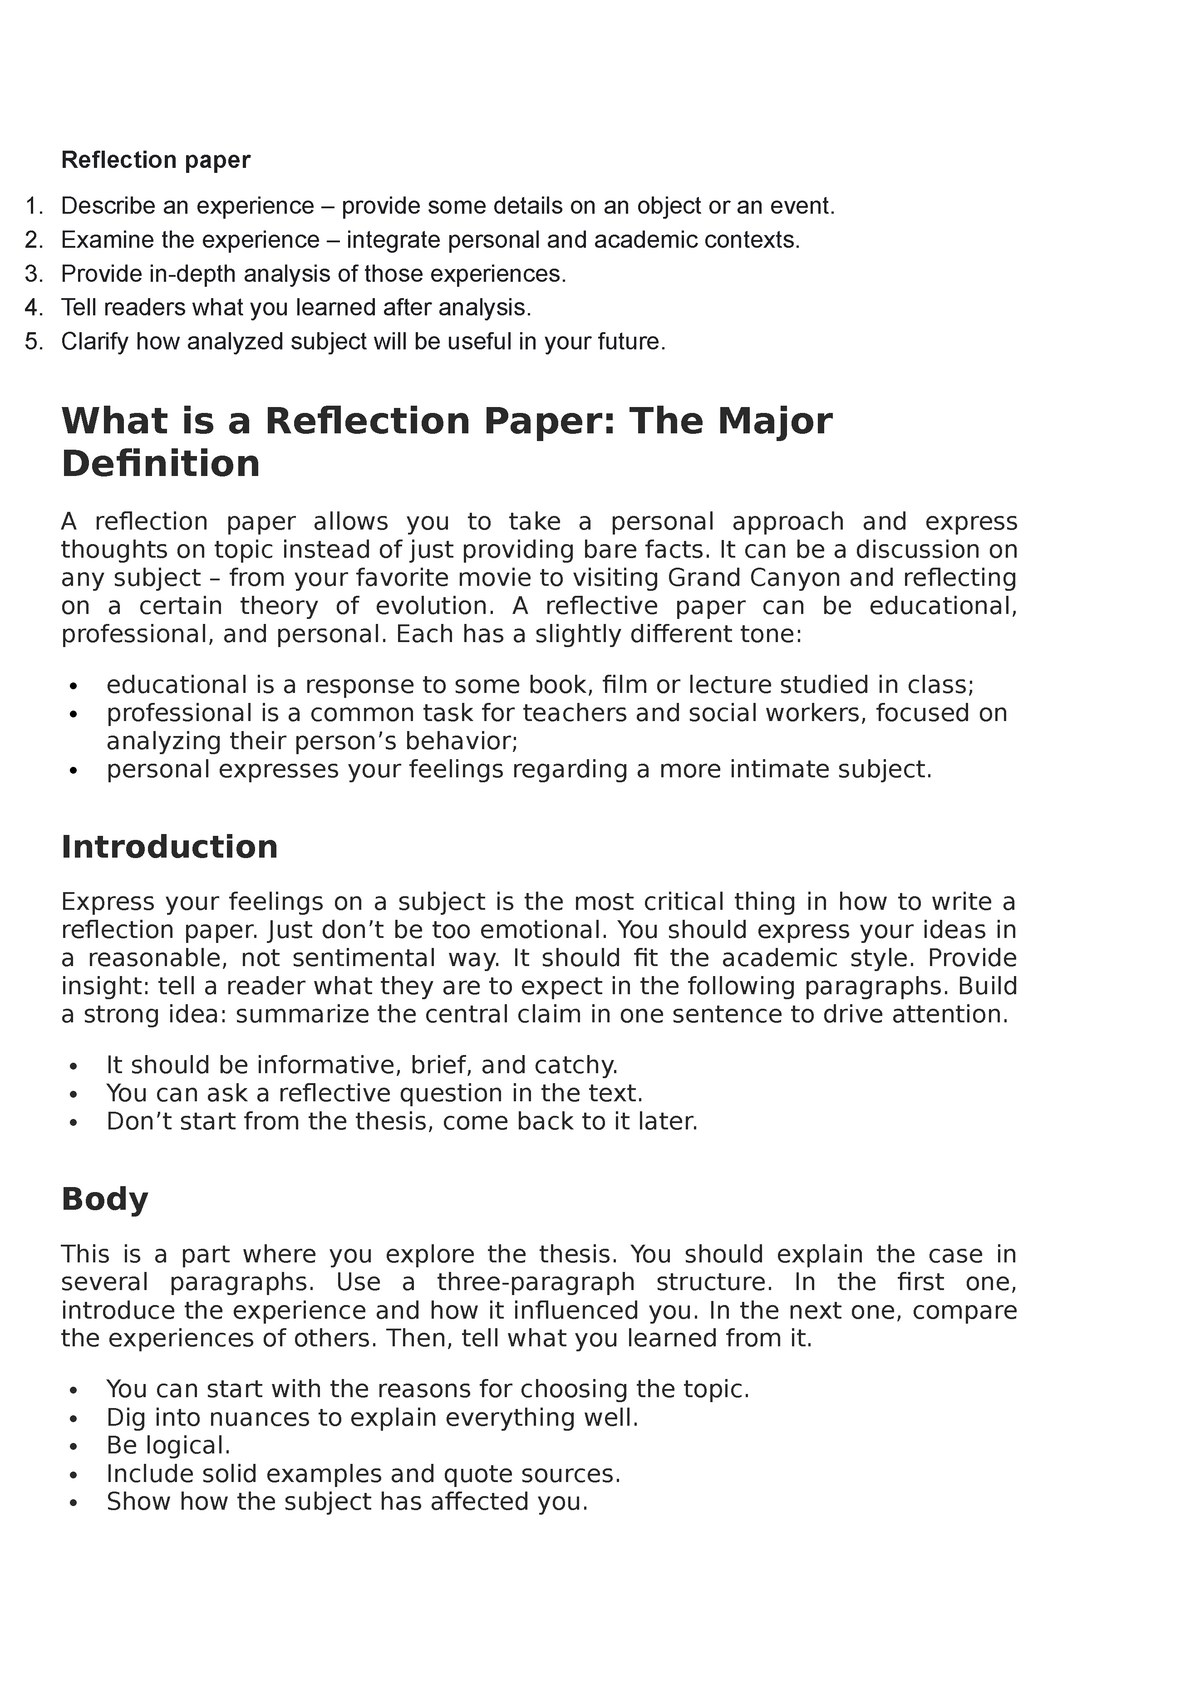 REFLECTIVE PAPER OVERVIEW What is reflective